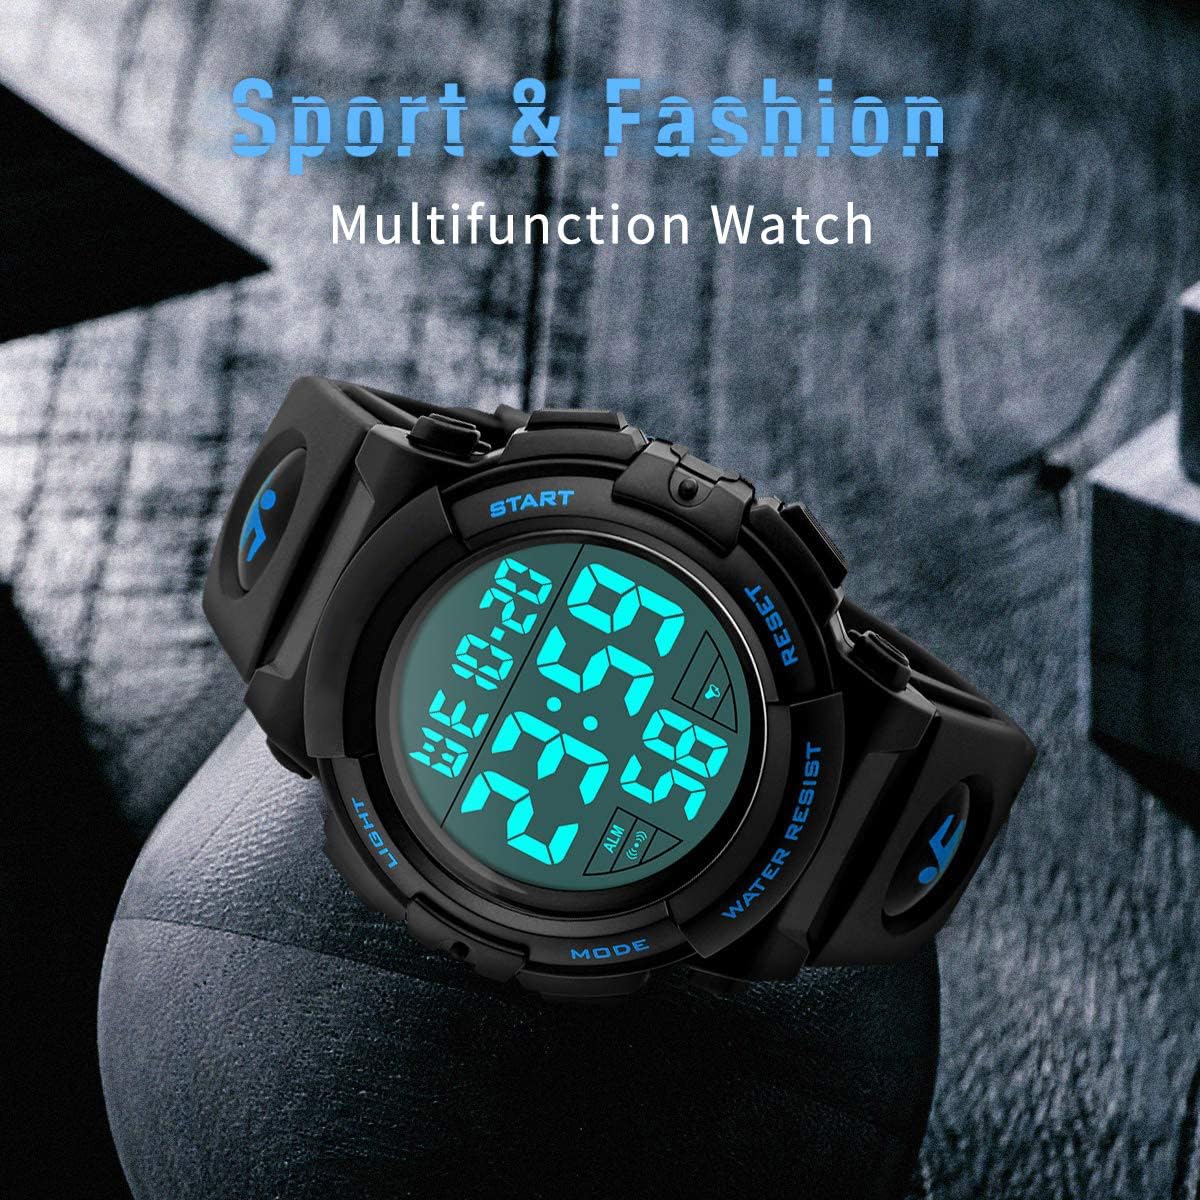 MJSCPHBJK Mens Digital Watch, Sports Military Watches Waterproof Outdoor Chronograph Watch for Men with LED Back Ligh/Alarm/Date